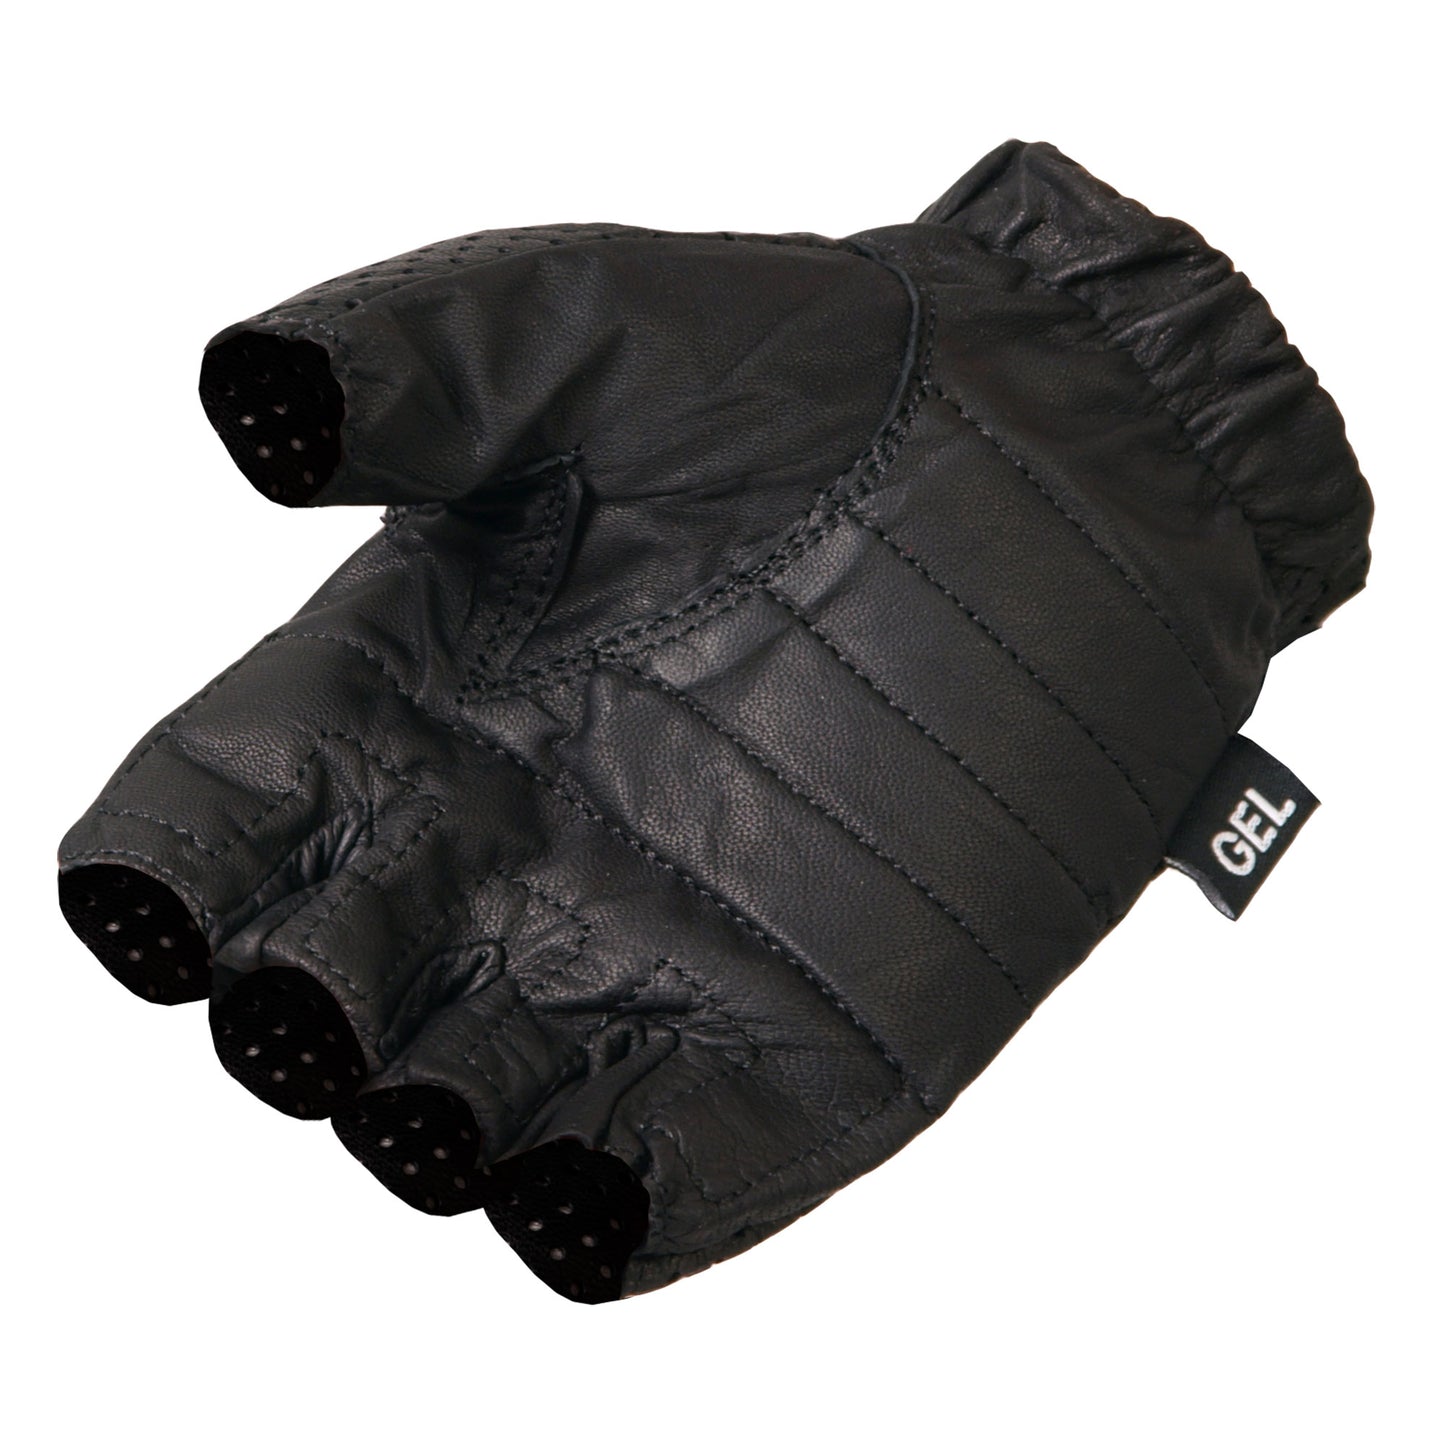 Hot Leathers GVM1016 Unlined Fingerless Vented Leather Gloves with Padded Gel Palm